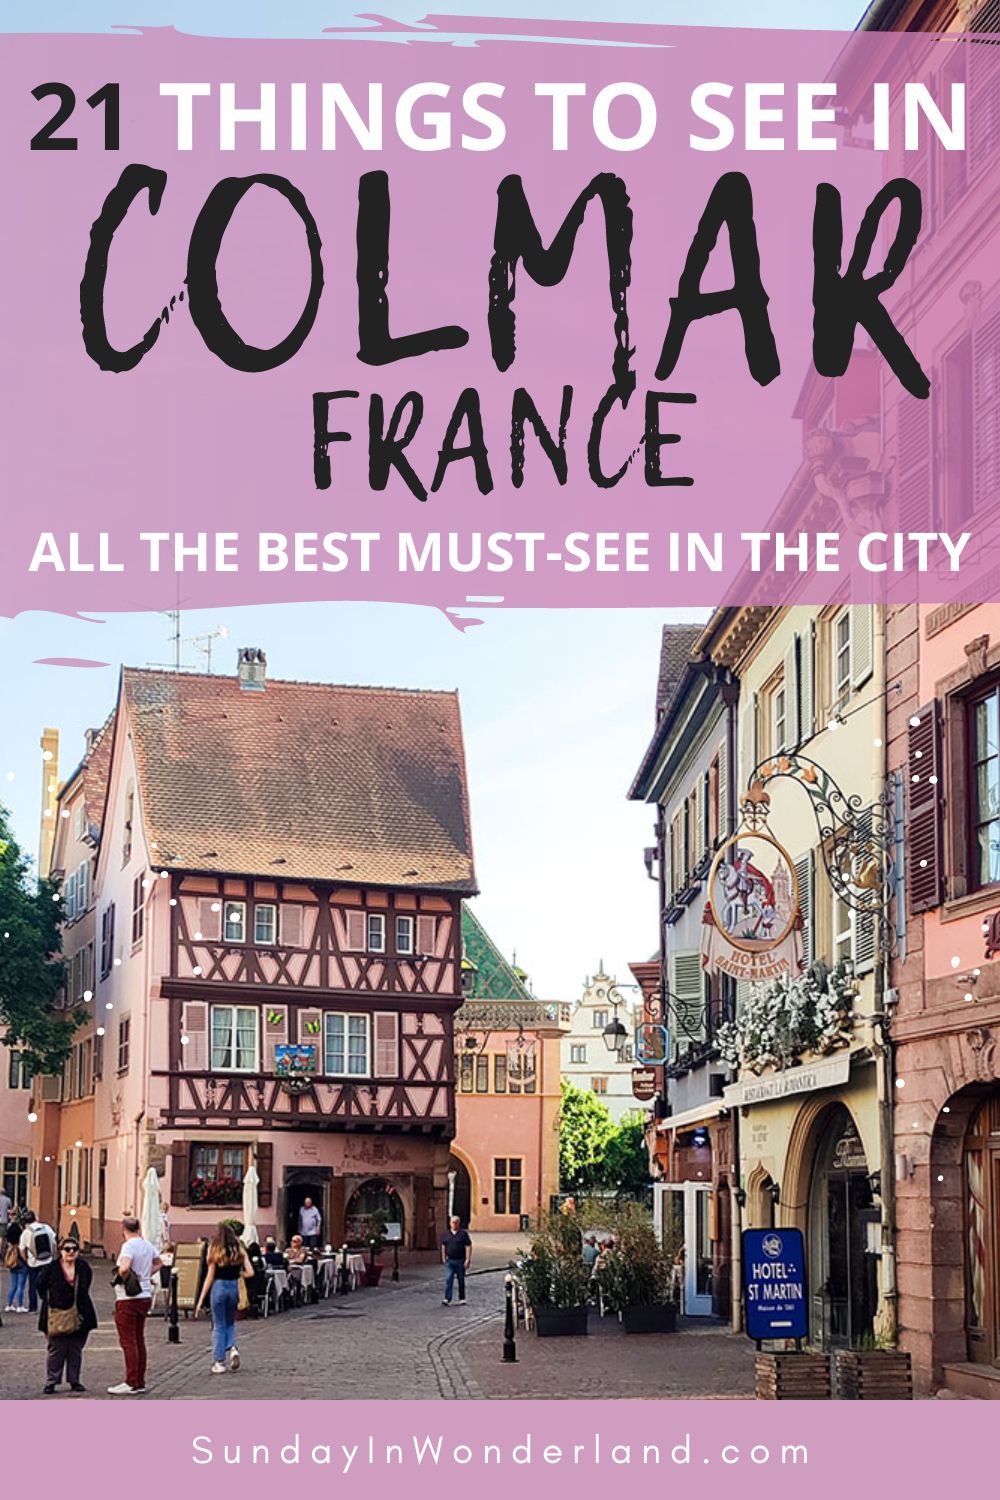 Must see in Colmar, France - Pinterest pin